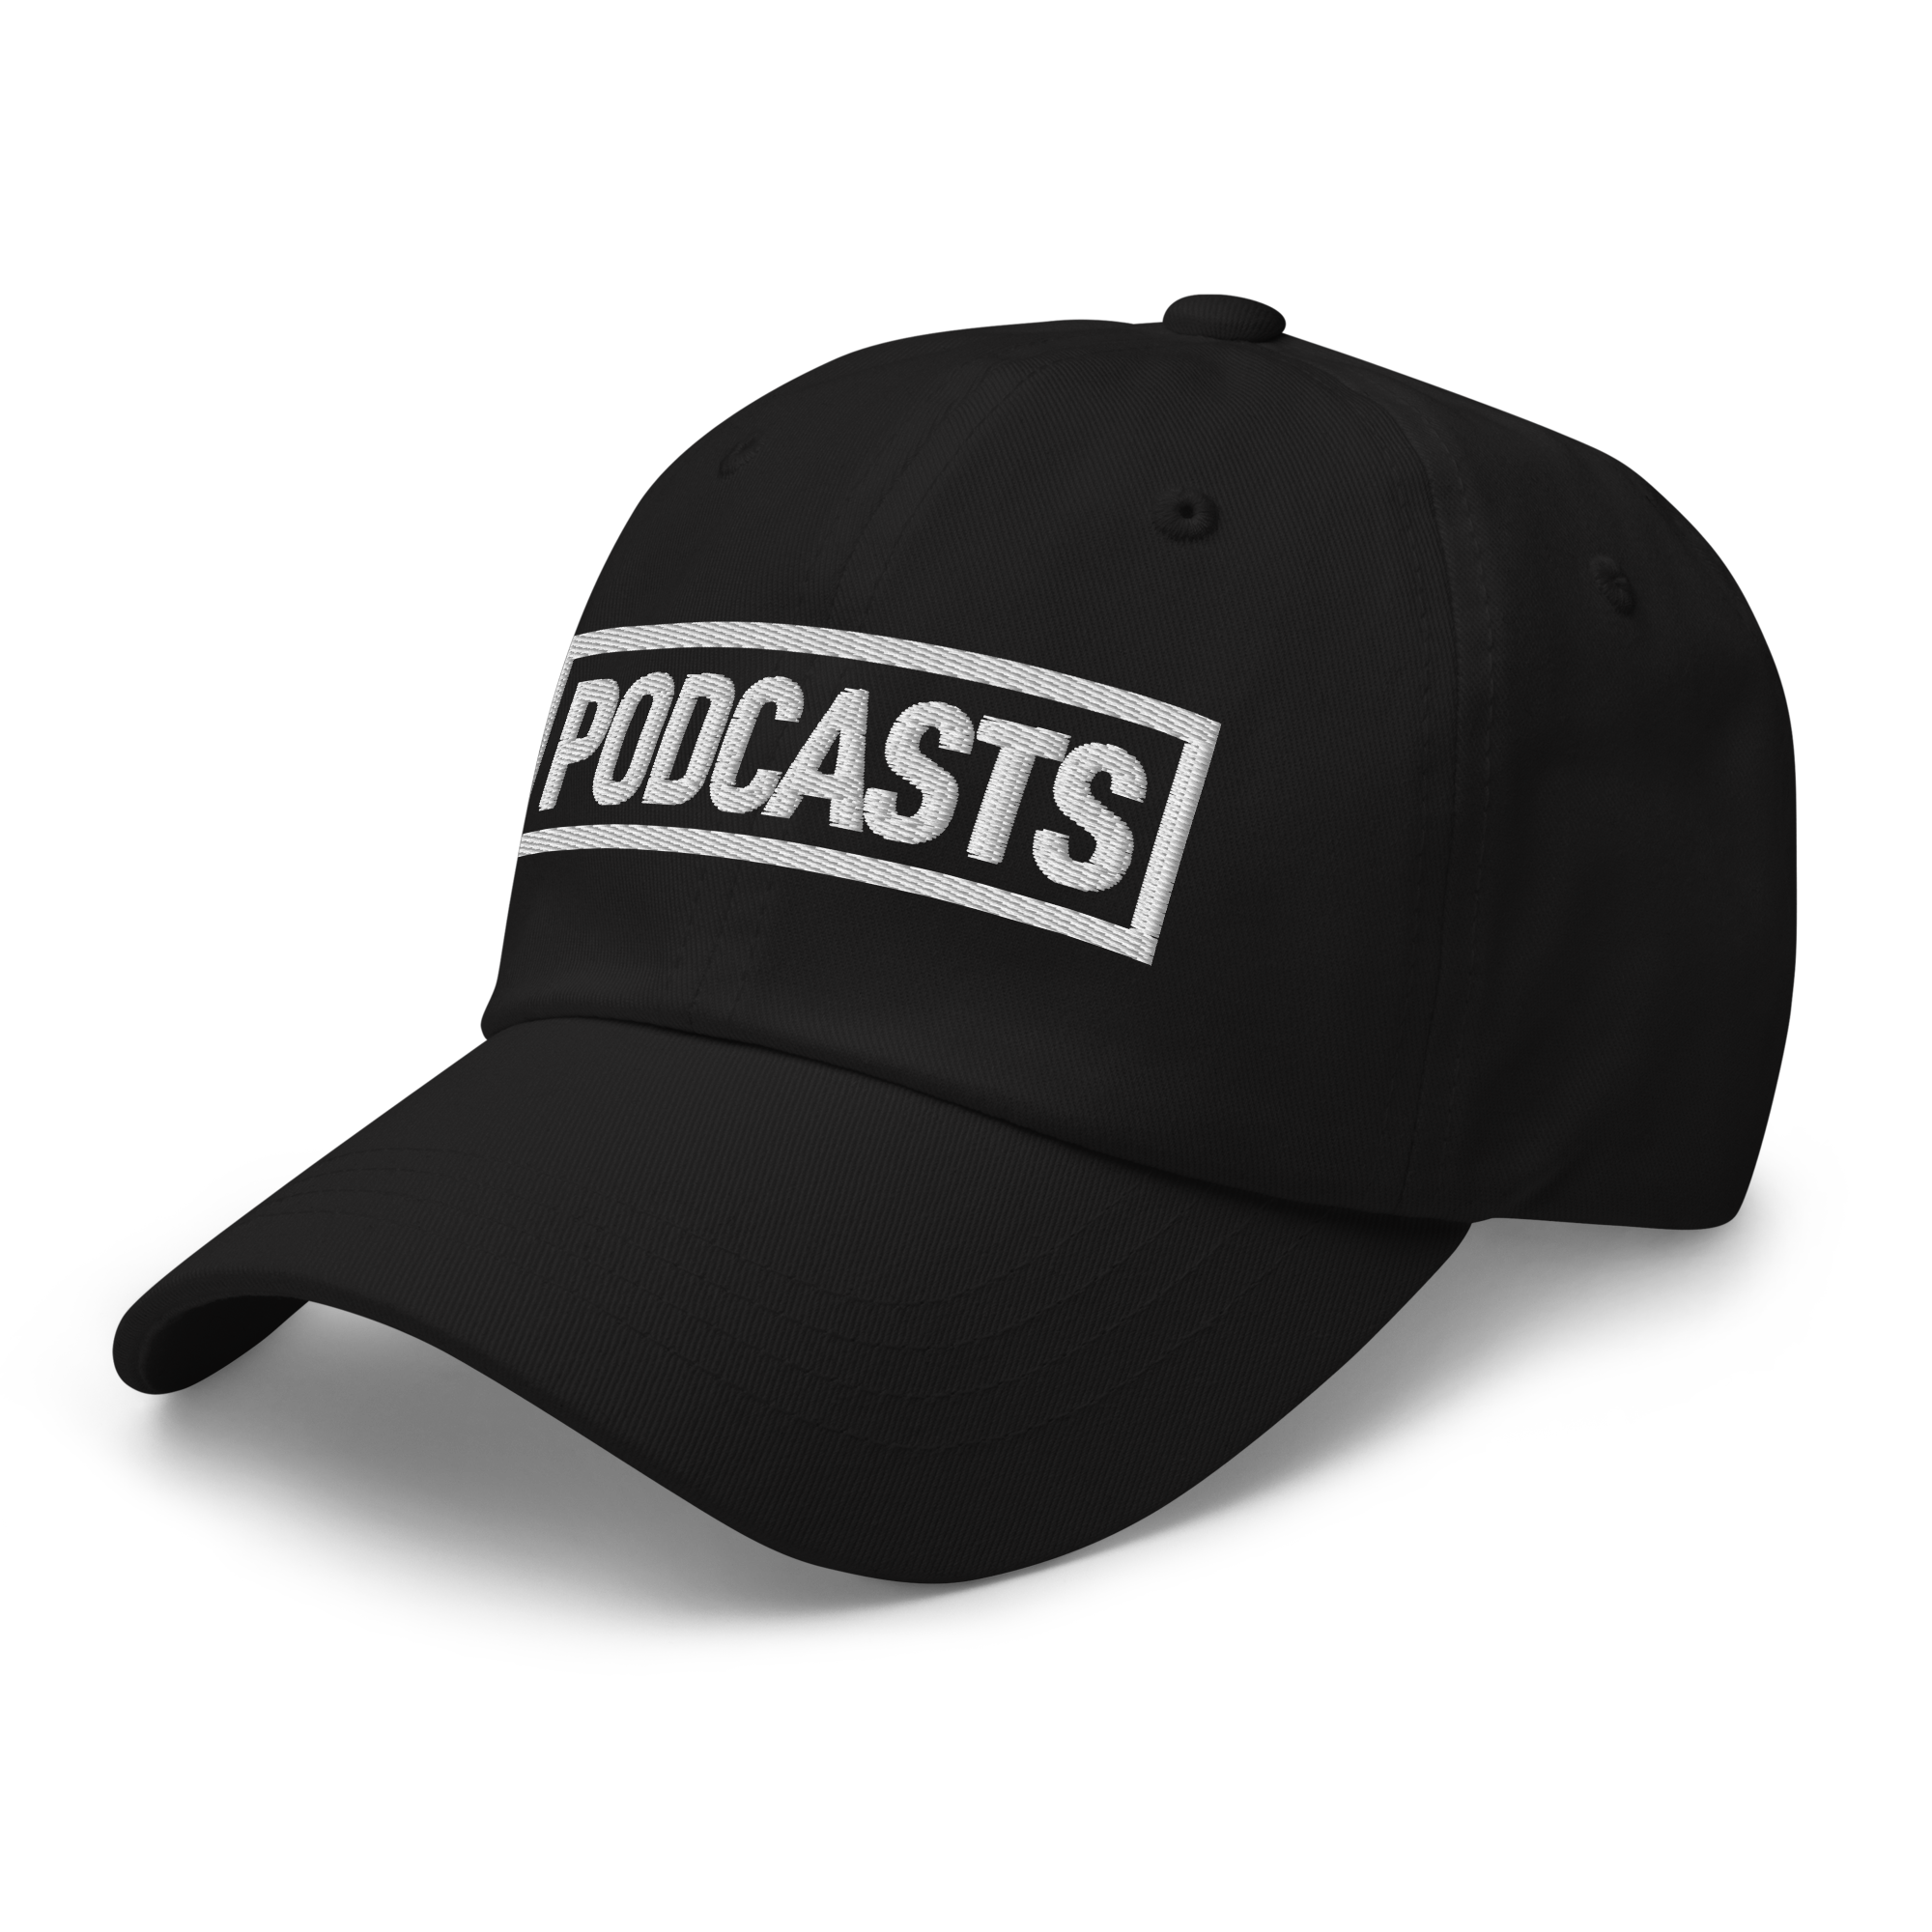 Literally with Rob Lowe: Podcasts Cap